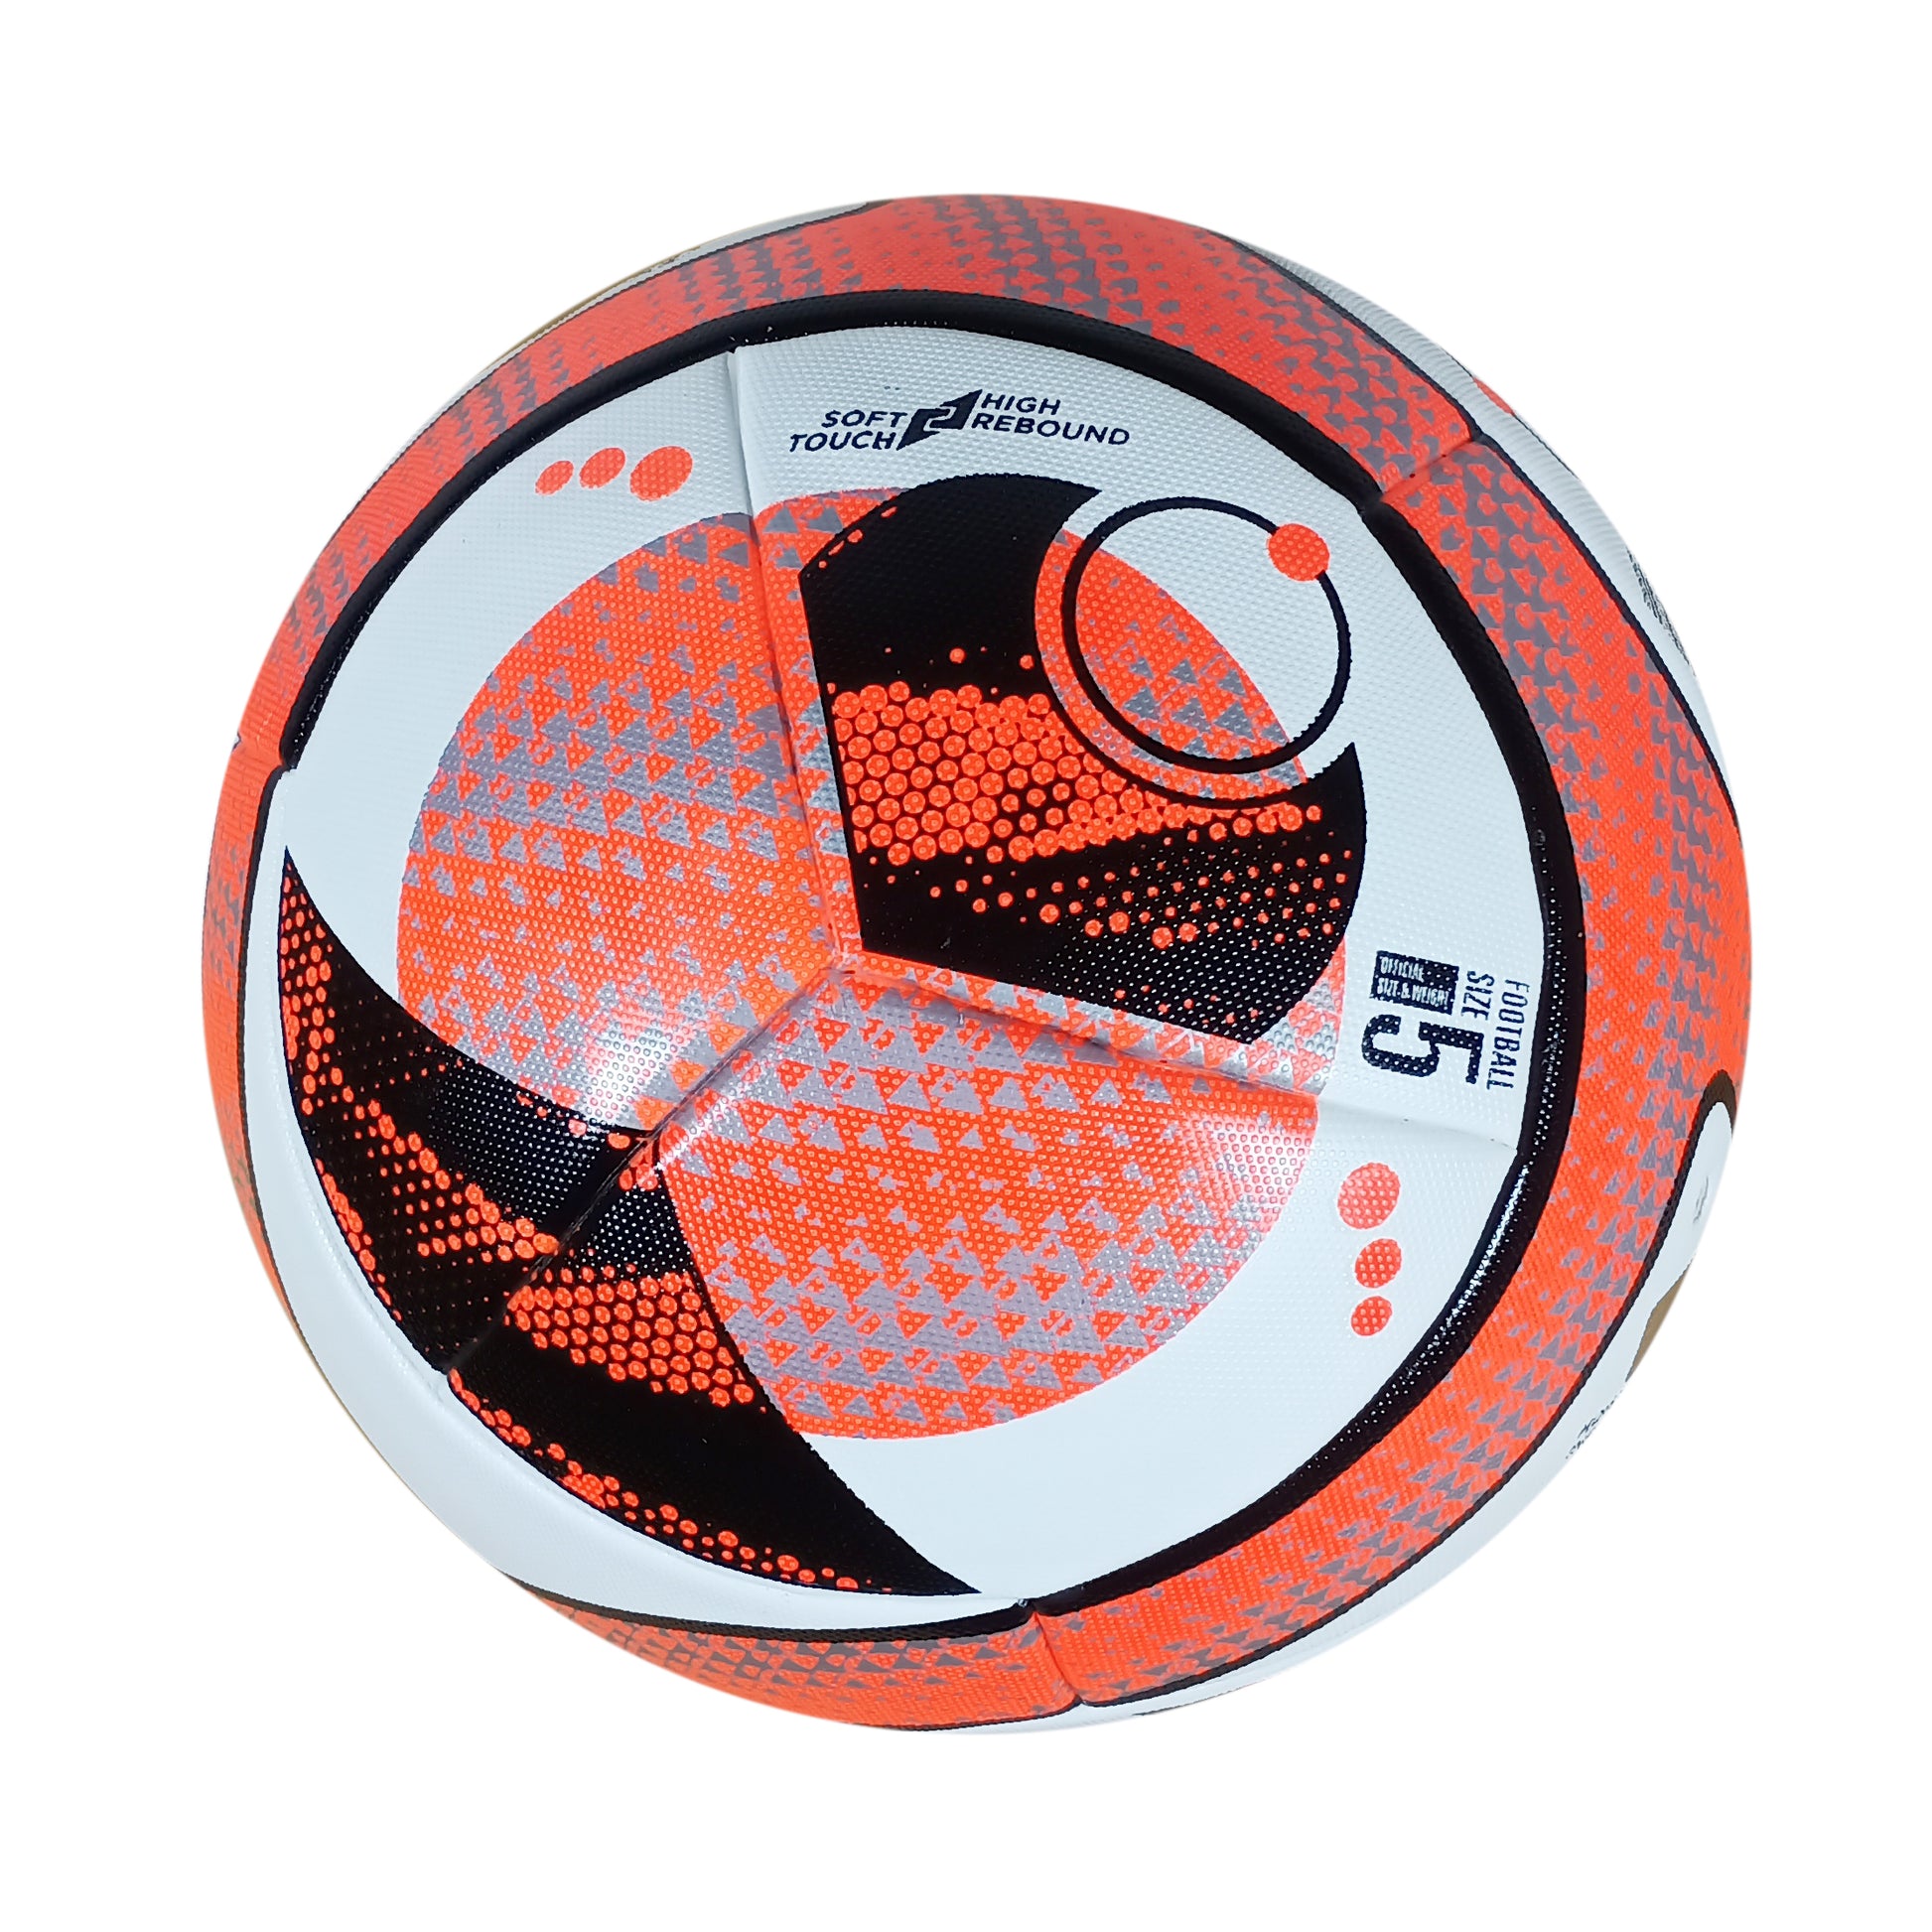 Vector X X-Force Thermo Bonded Football, Size 5 - Best Price online Prokicksports.com